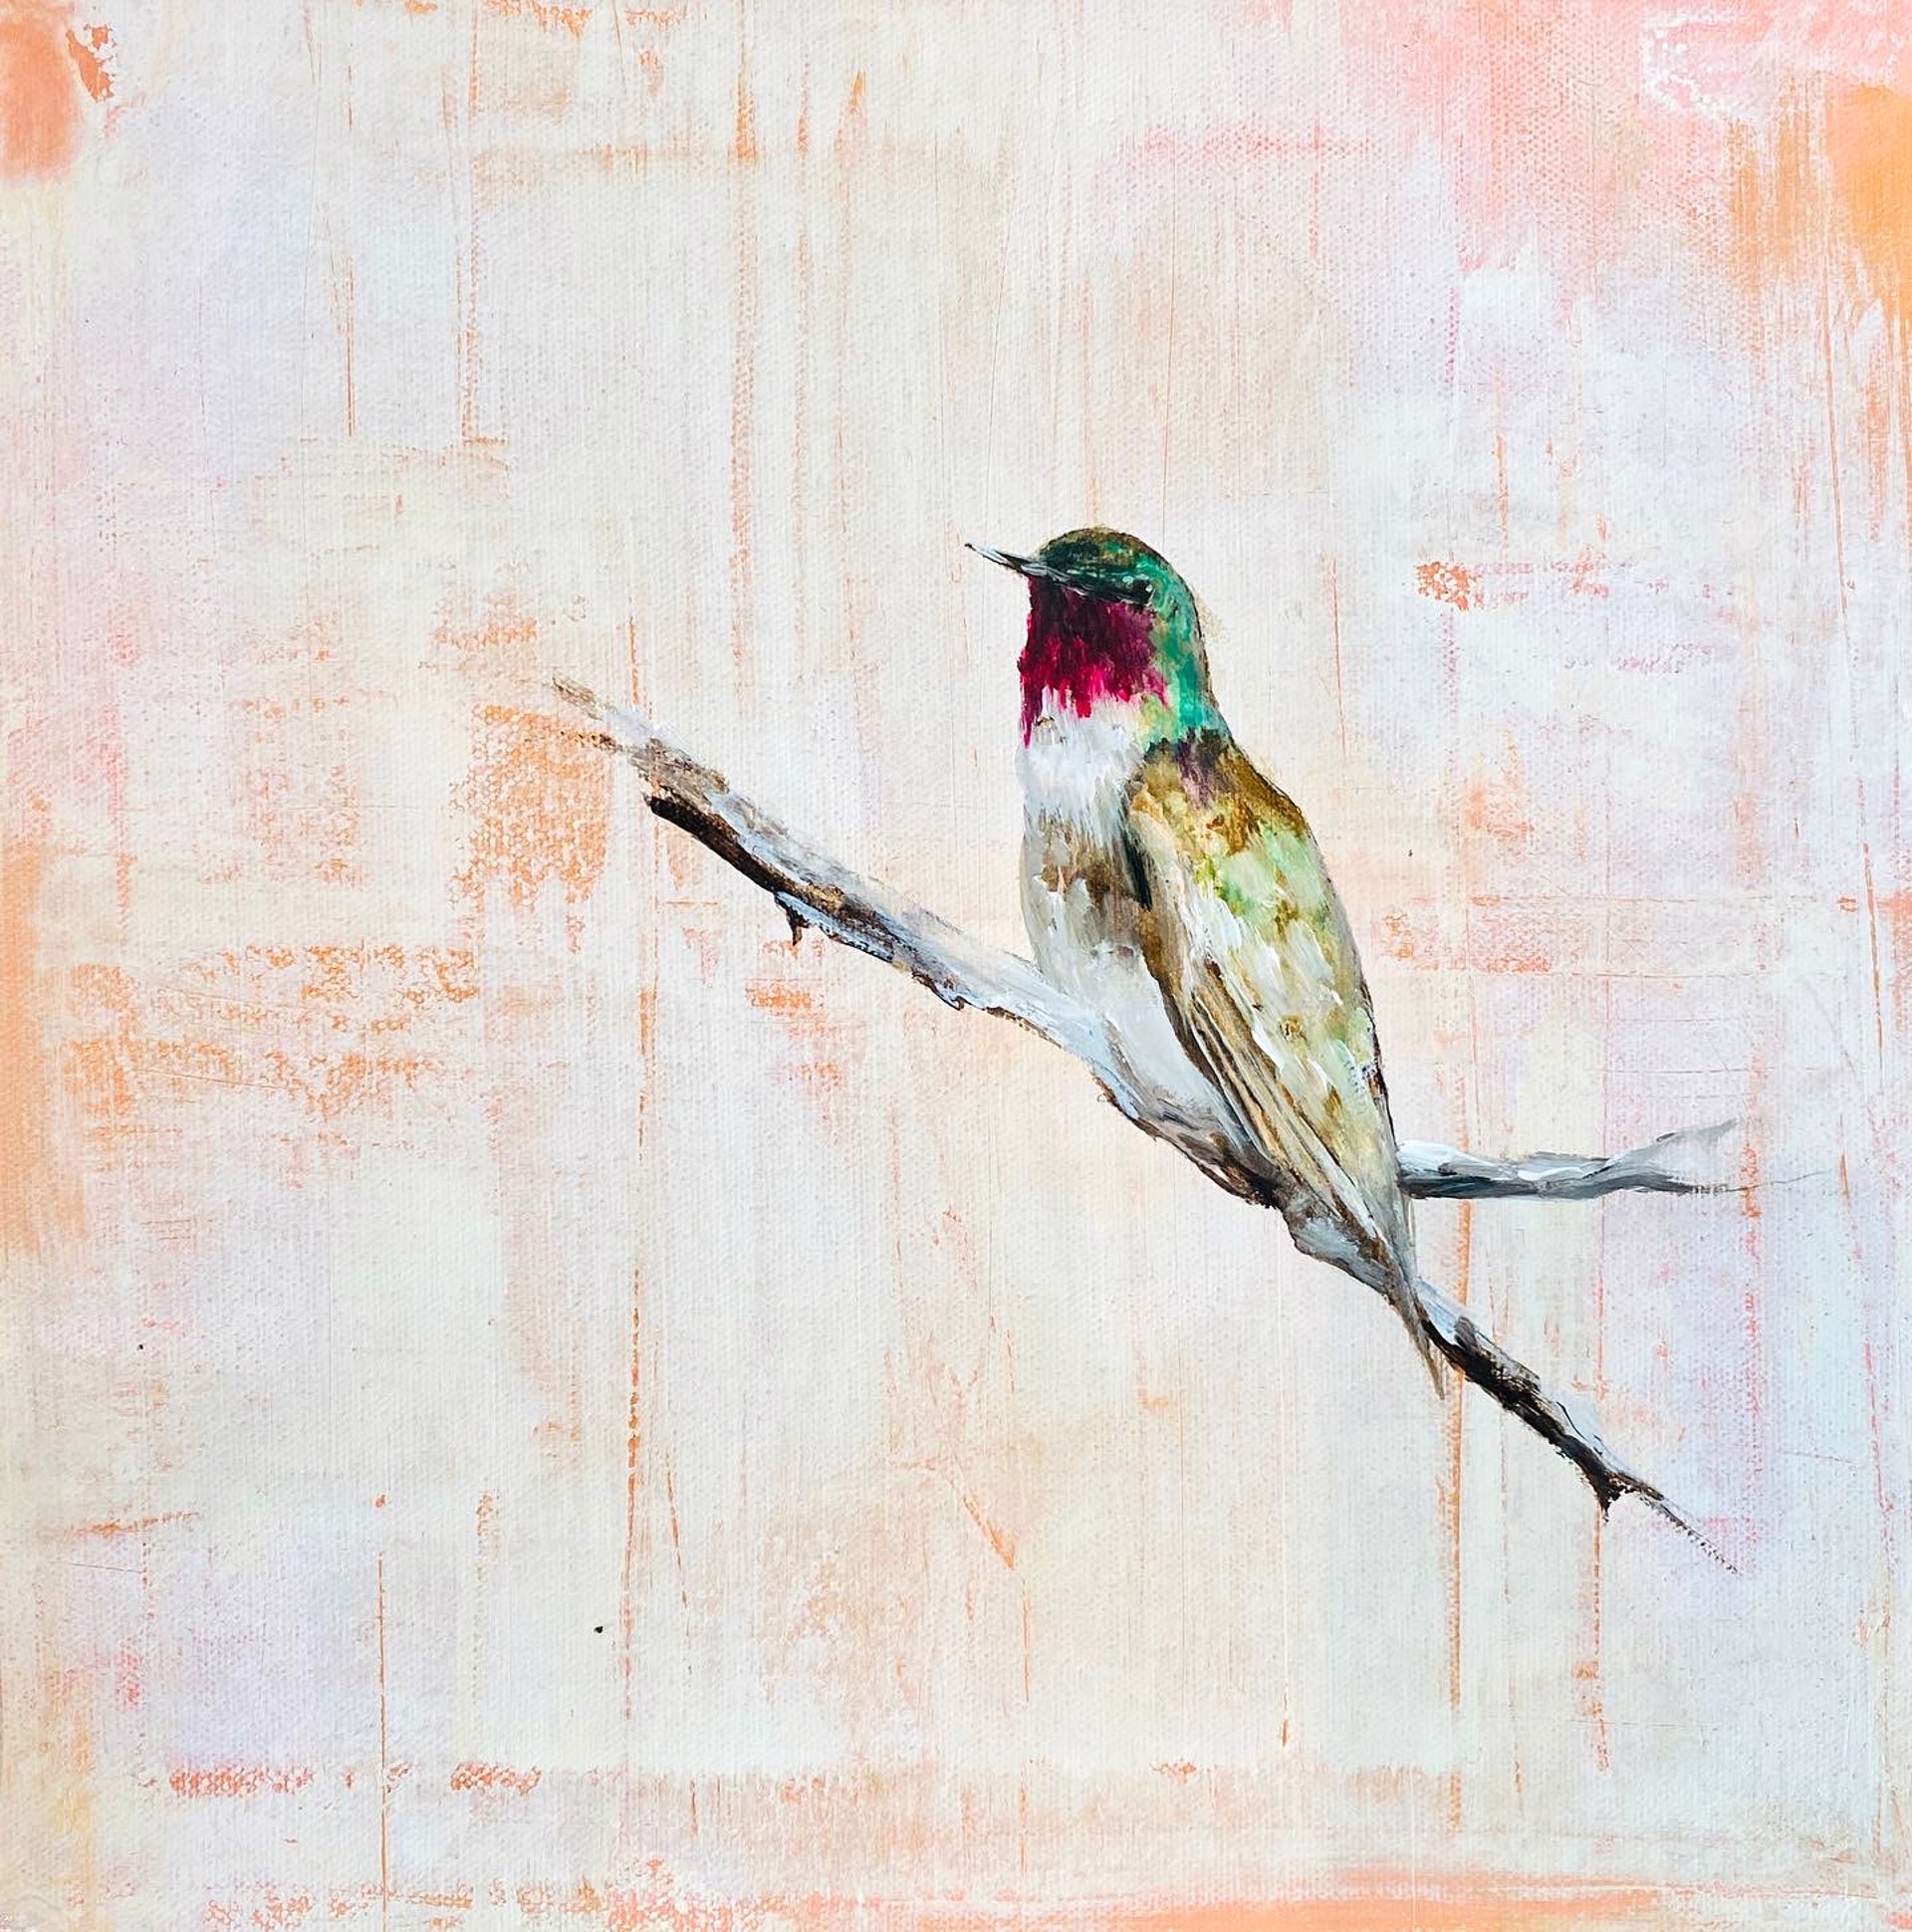 Original Oil Painting By Jenna Von Benedikt With Hummingbirds On An Abstract Background